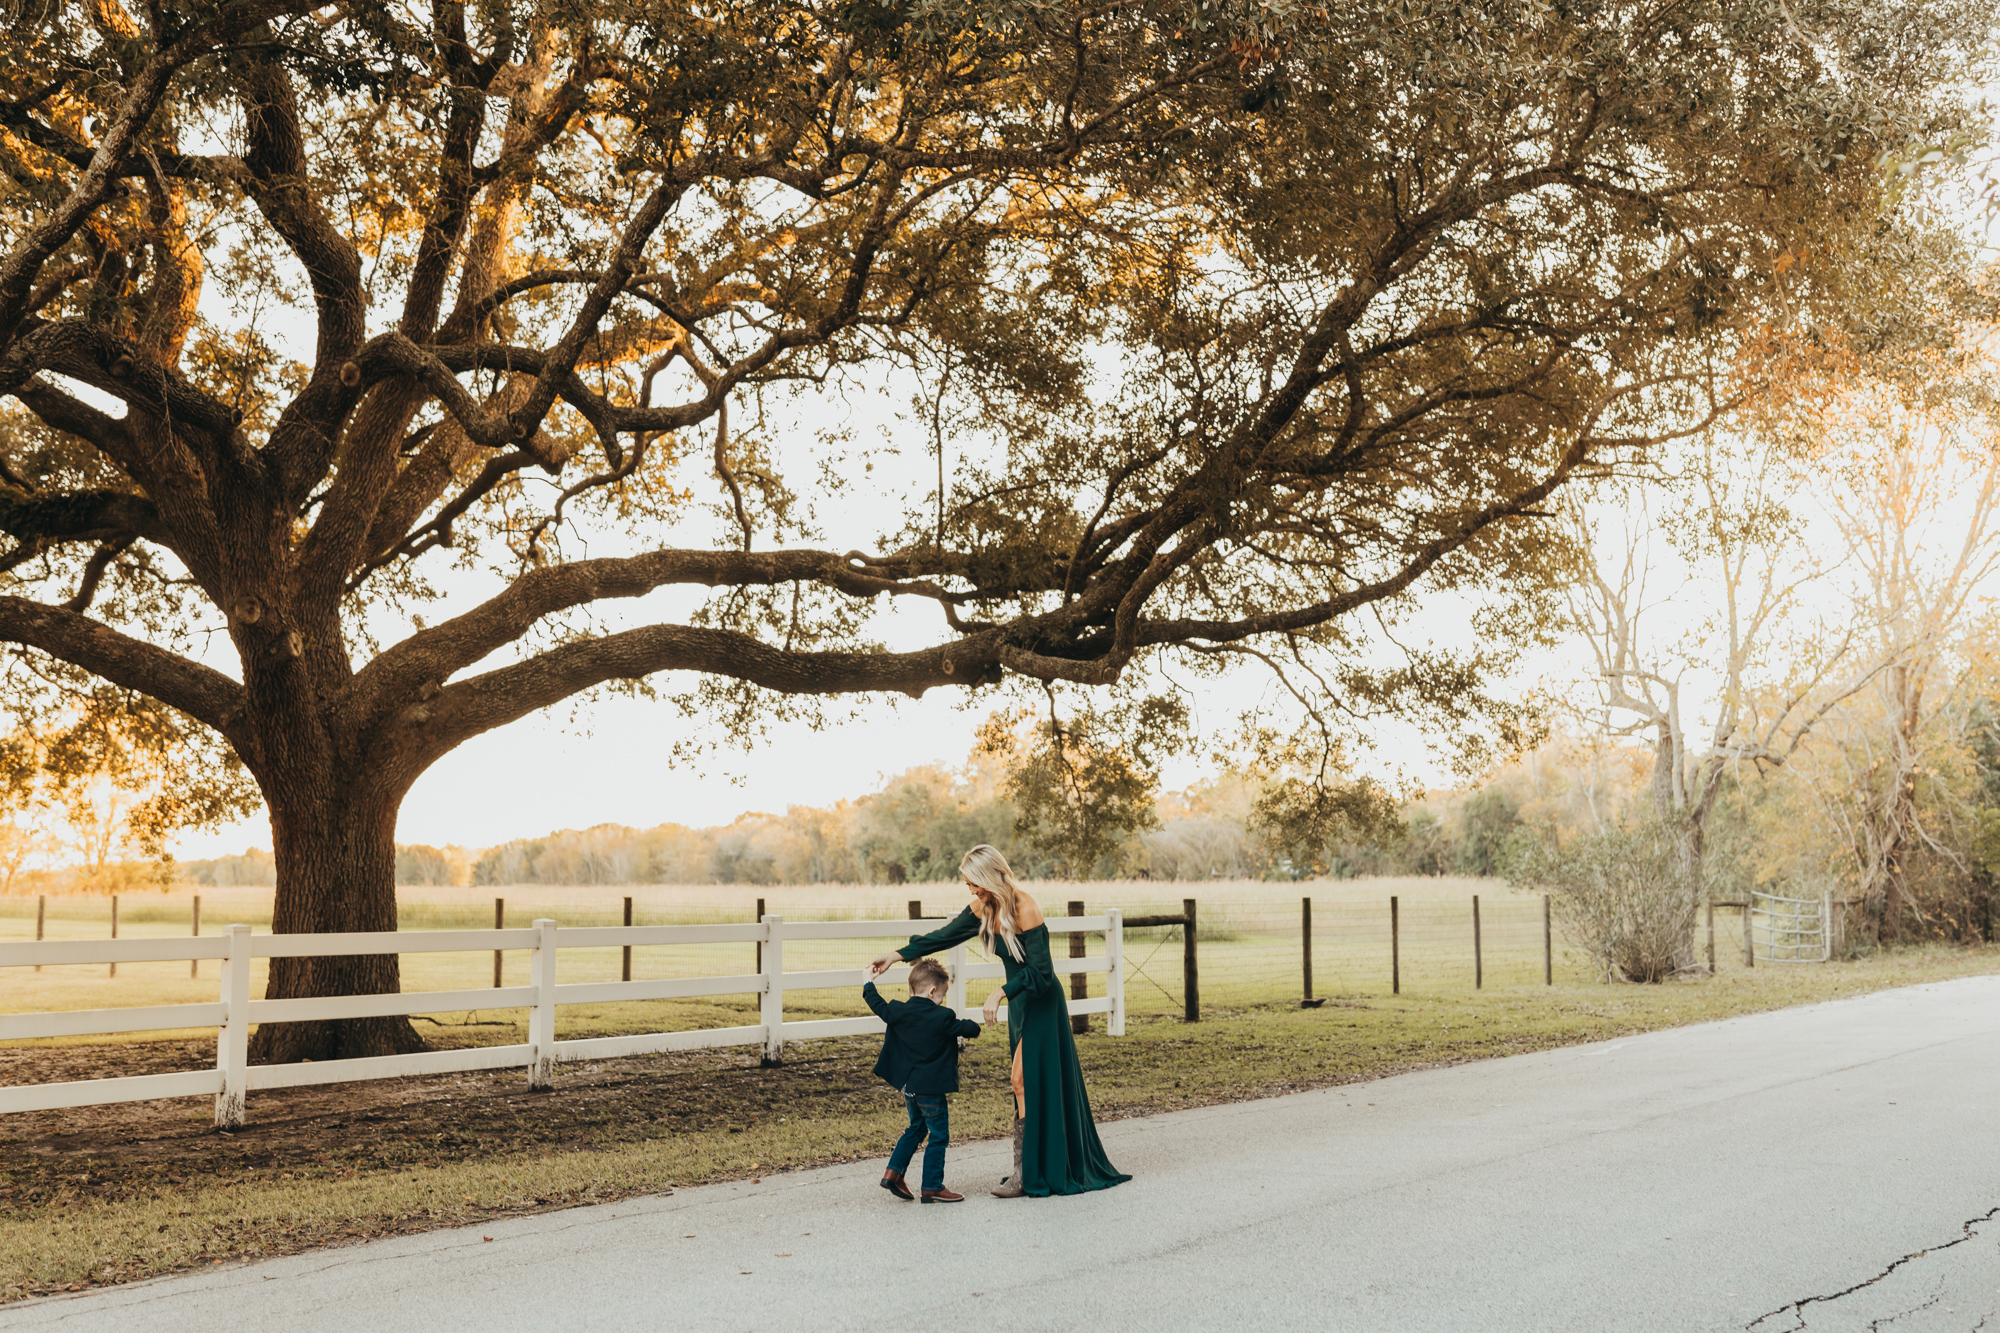 Mom and son dance in the middle of the street under old oak trees in Houston, during golden hour.